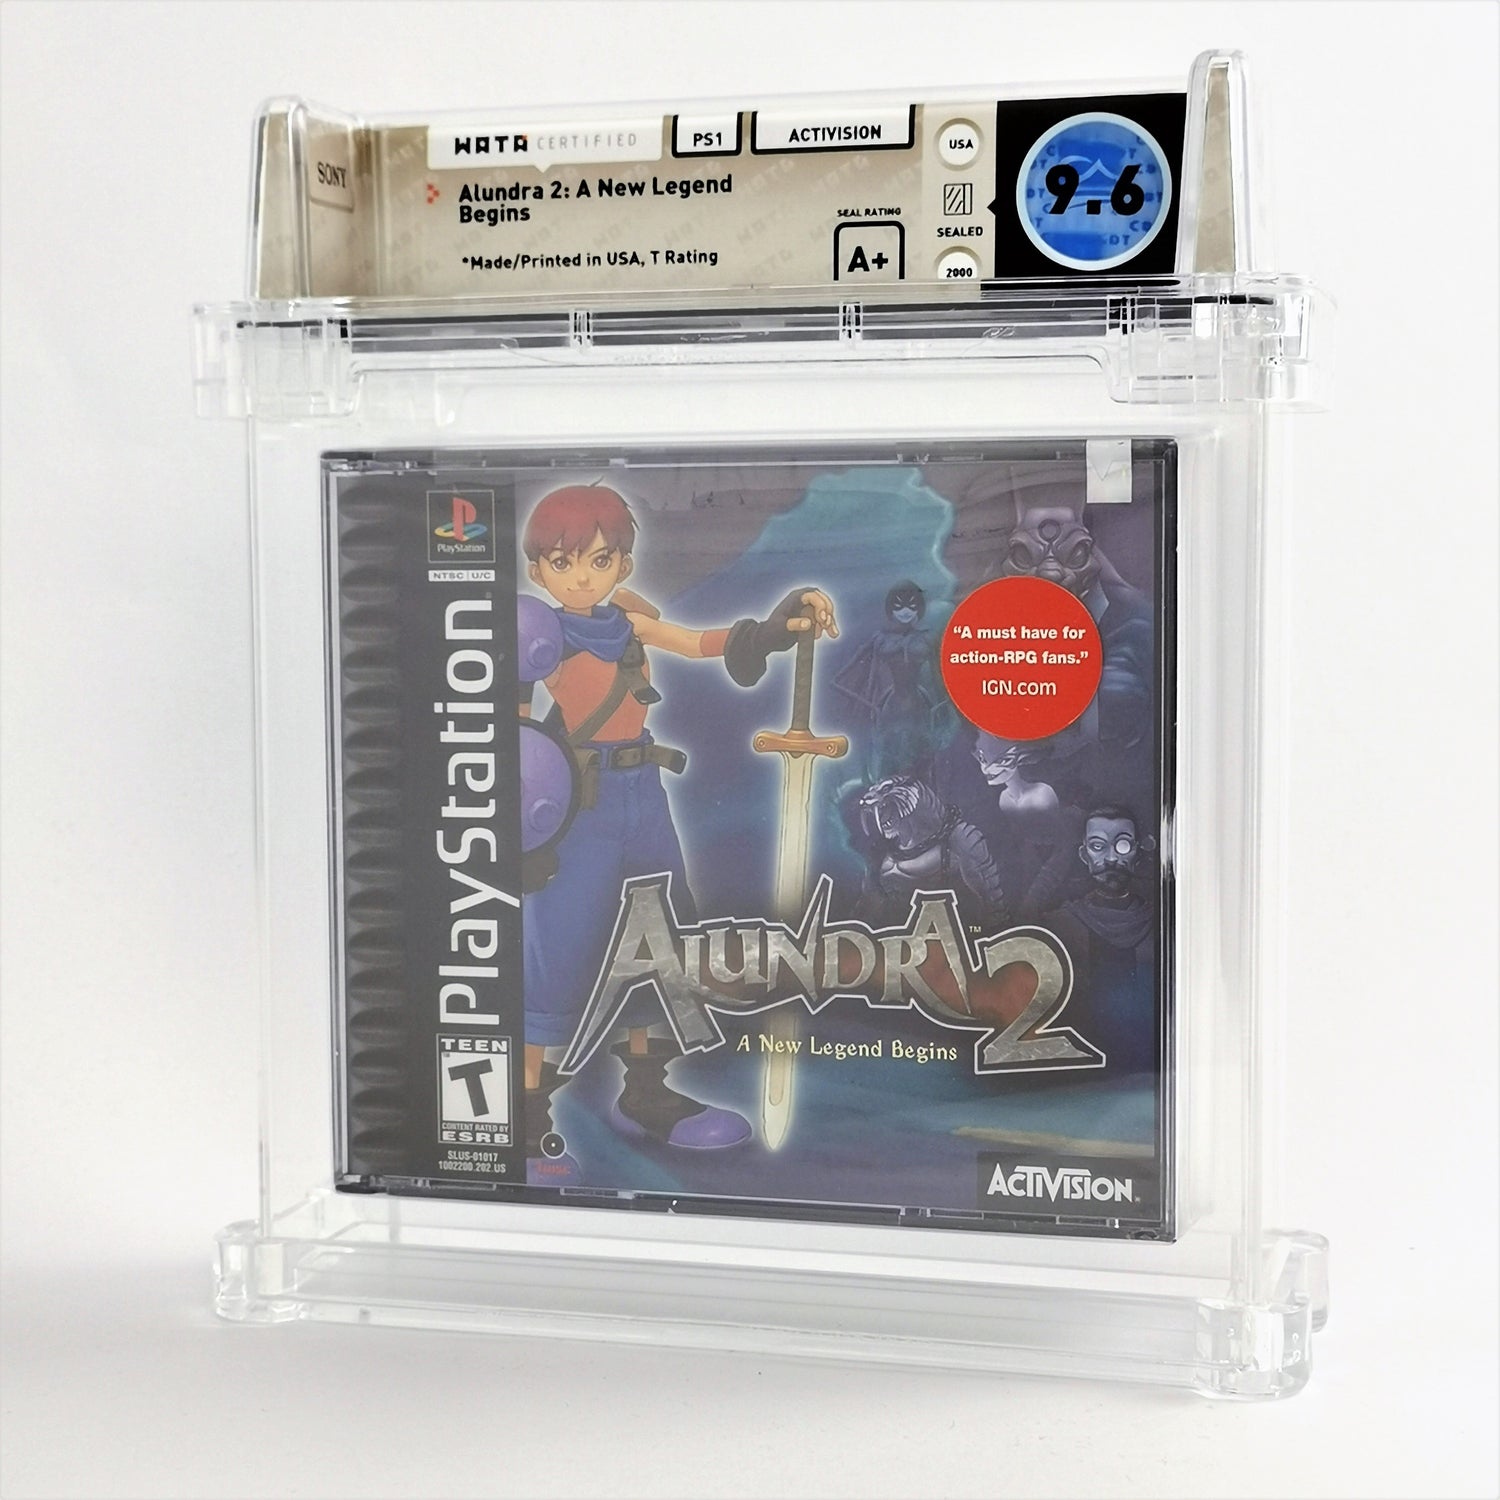 Sony Playstation 1 Game: Alundra 2 A New Legend Begins NEW | WATA Games 9.6 A+